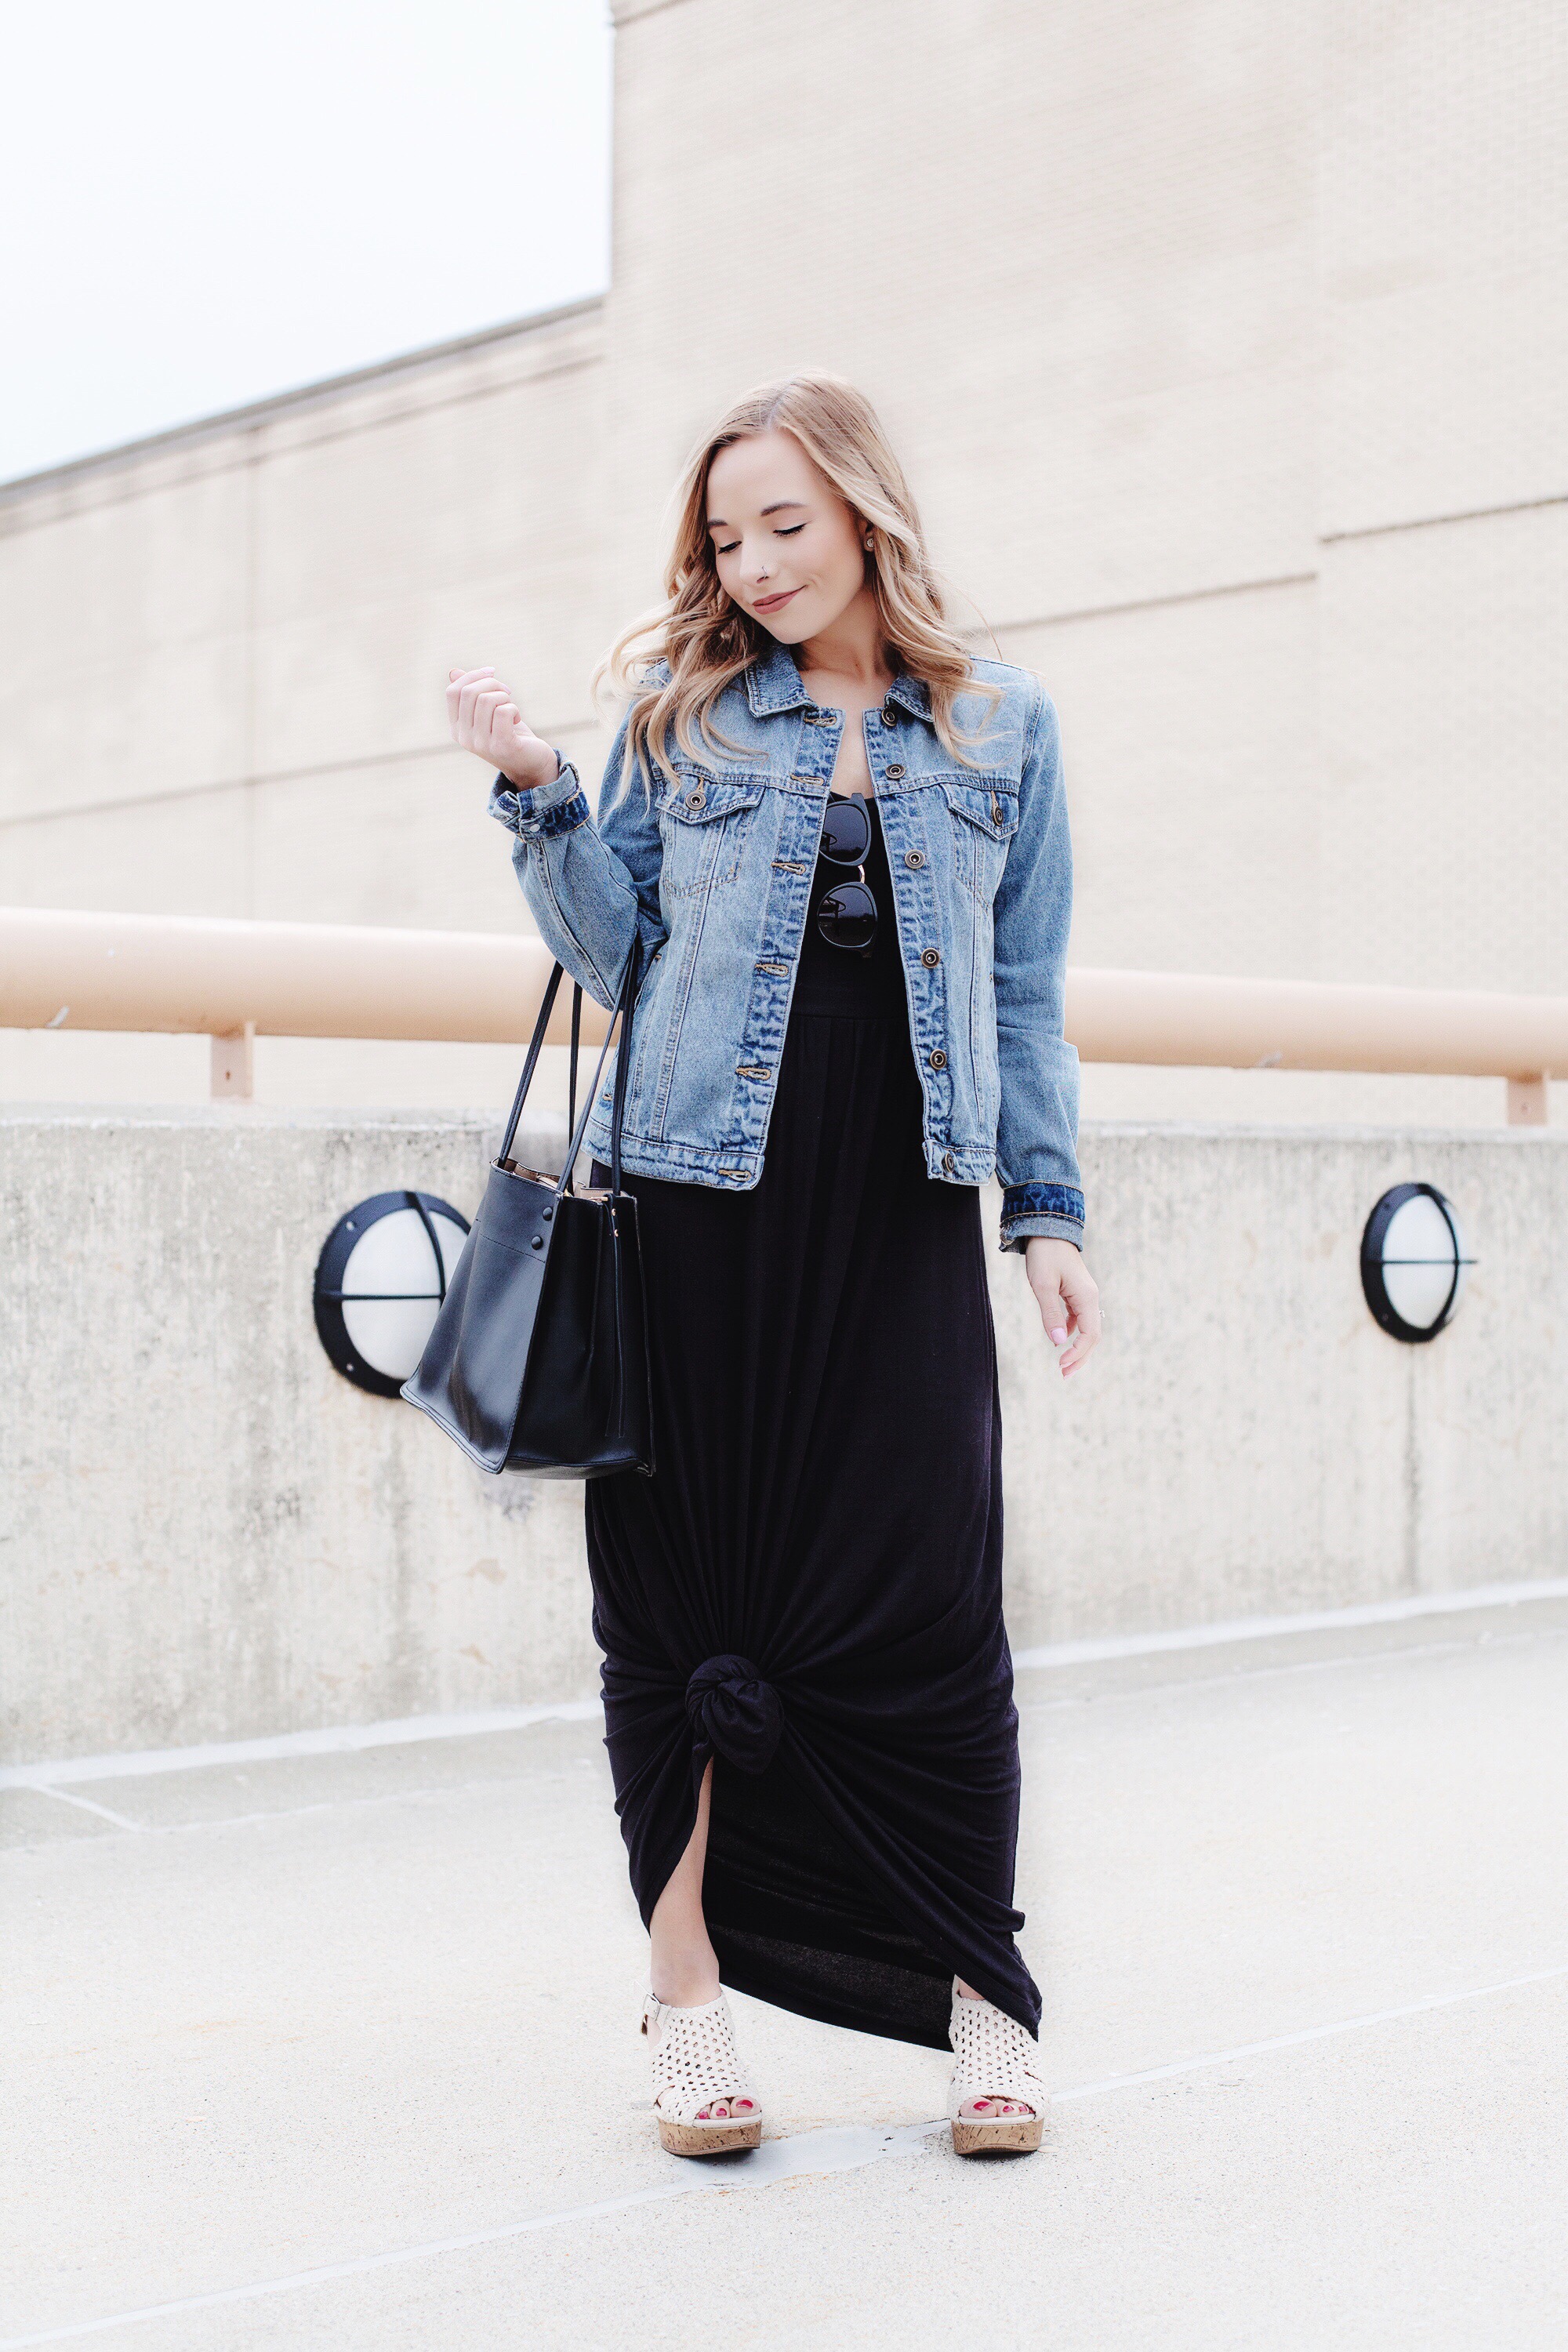 How To Wear A Maxi Dress When You're Short